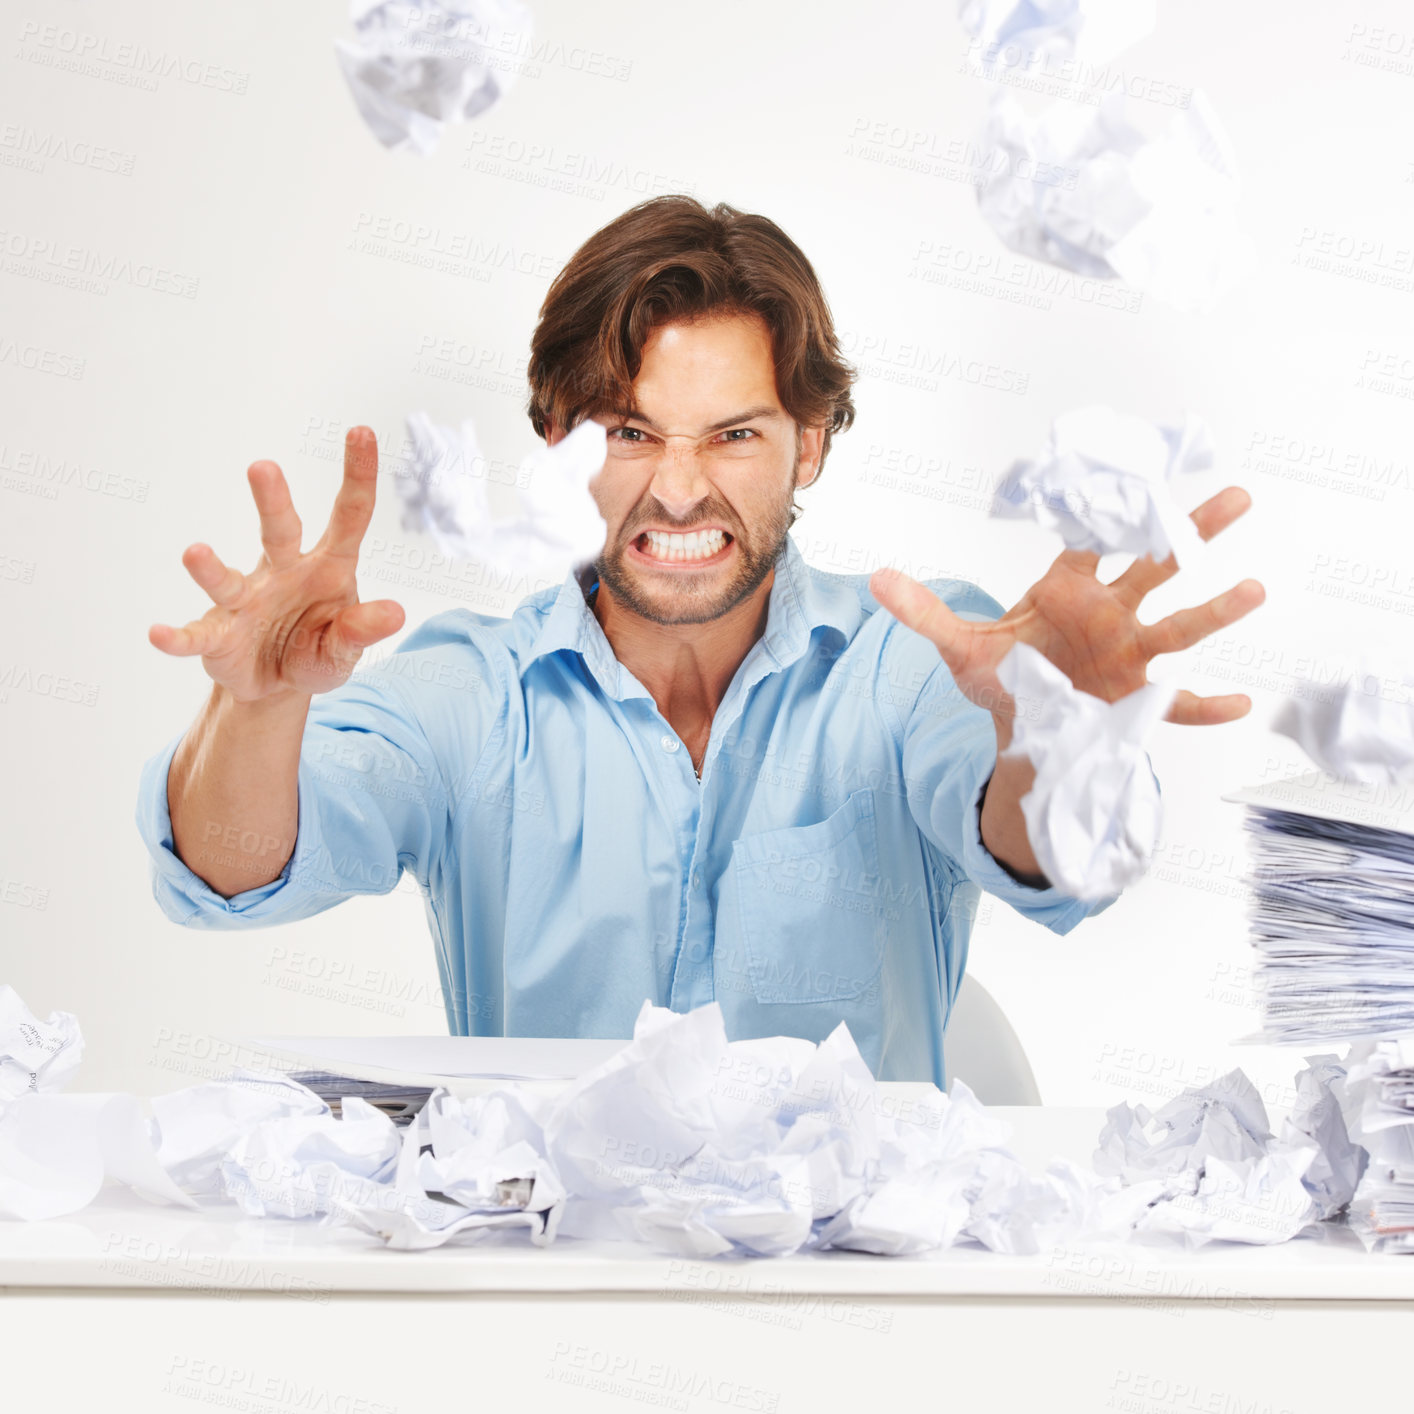 Buy stock photo Anger, business man portrait and accounting documents with frustrated worker with white background. Isolated, overworked and angry professional with paperwork, files and audit working with stress